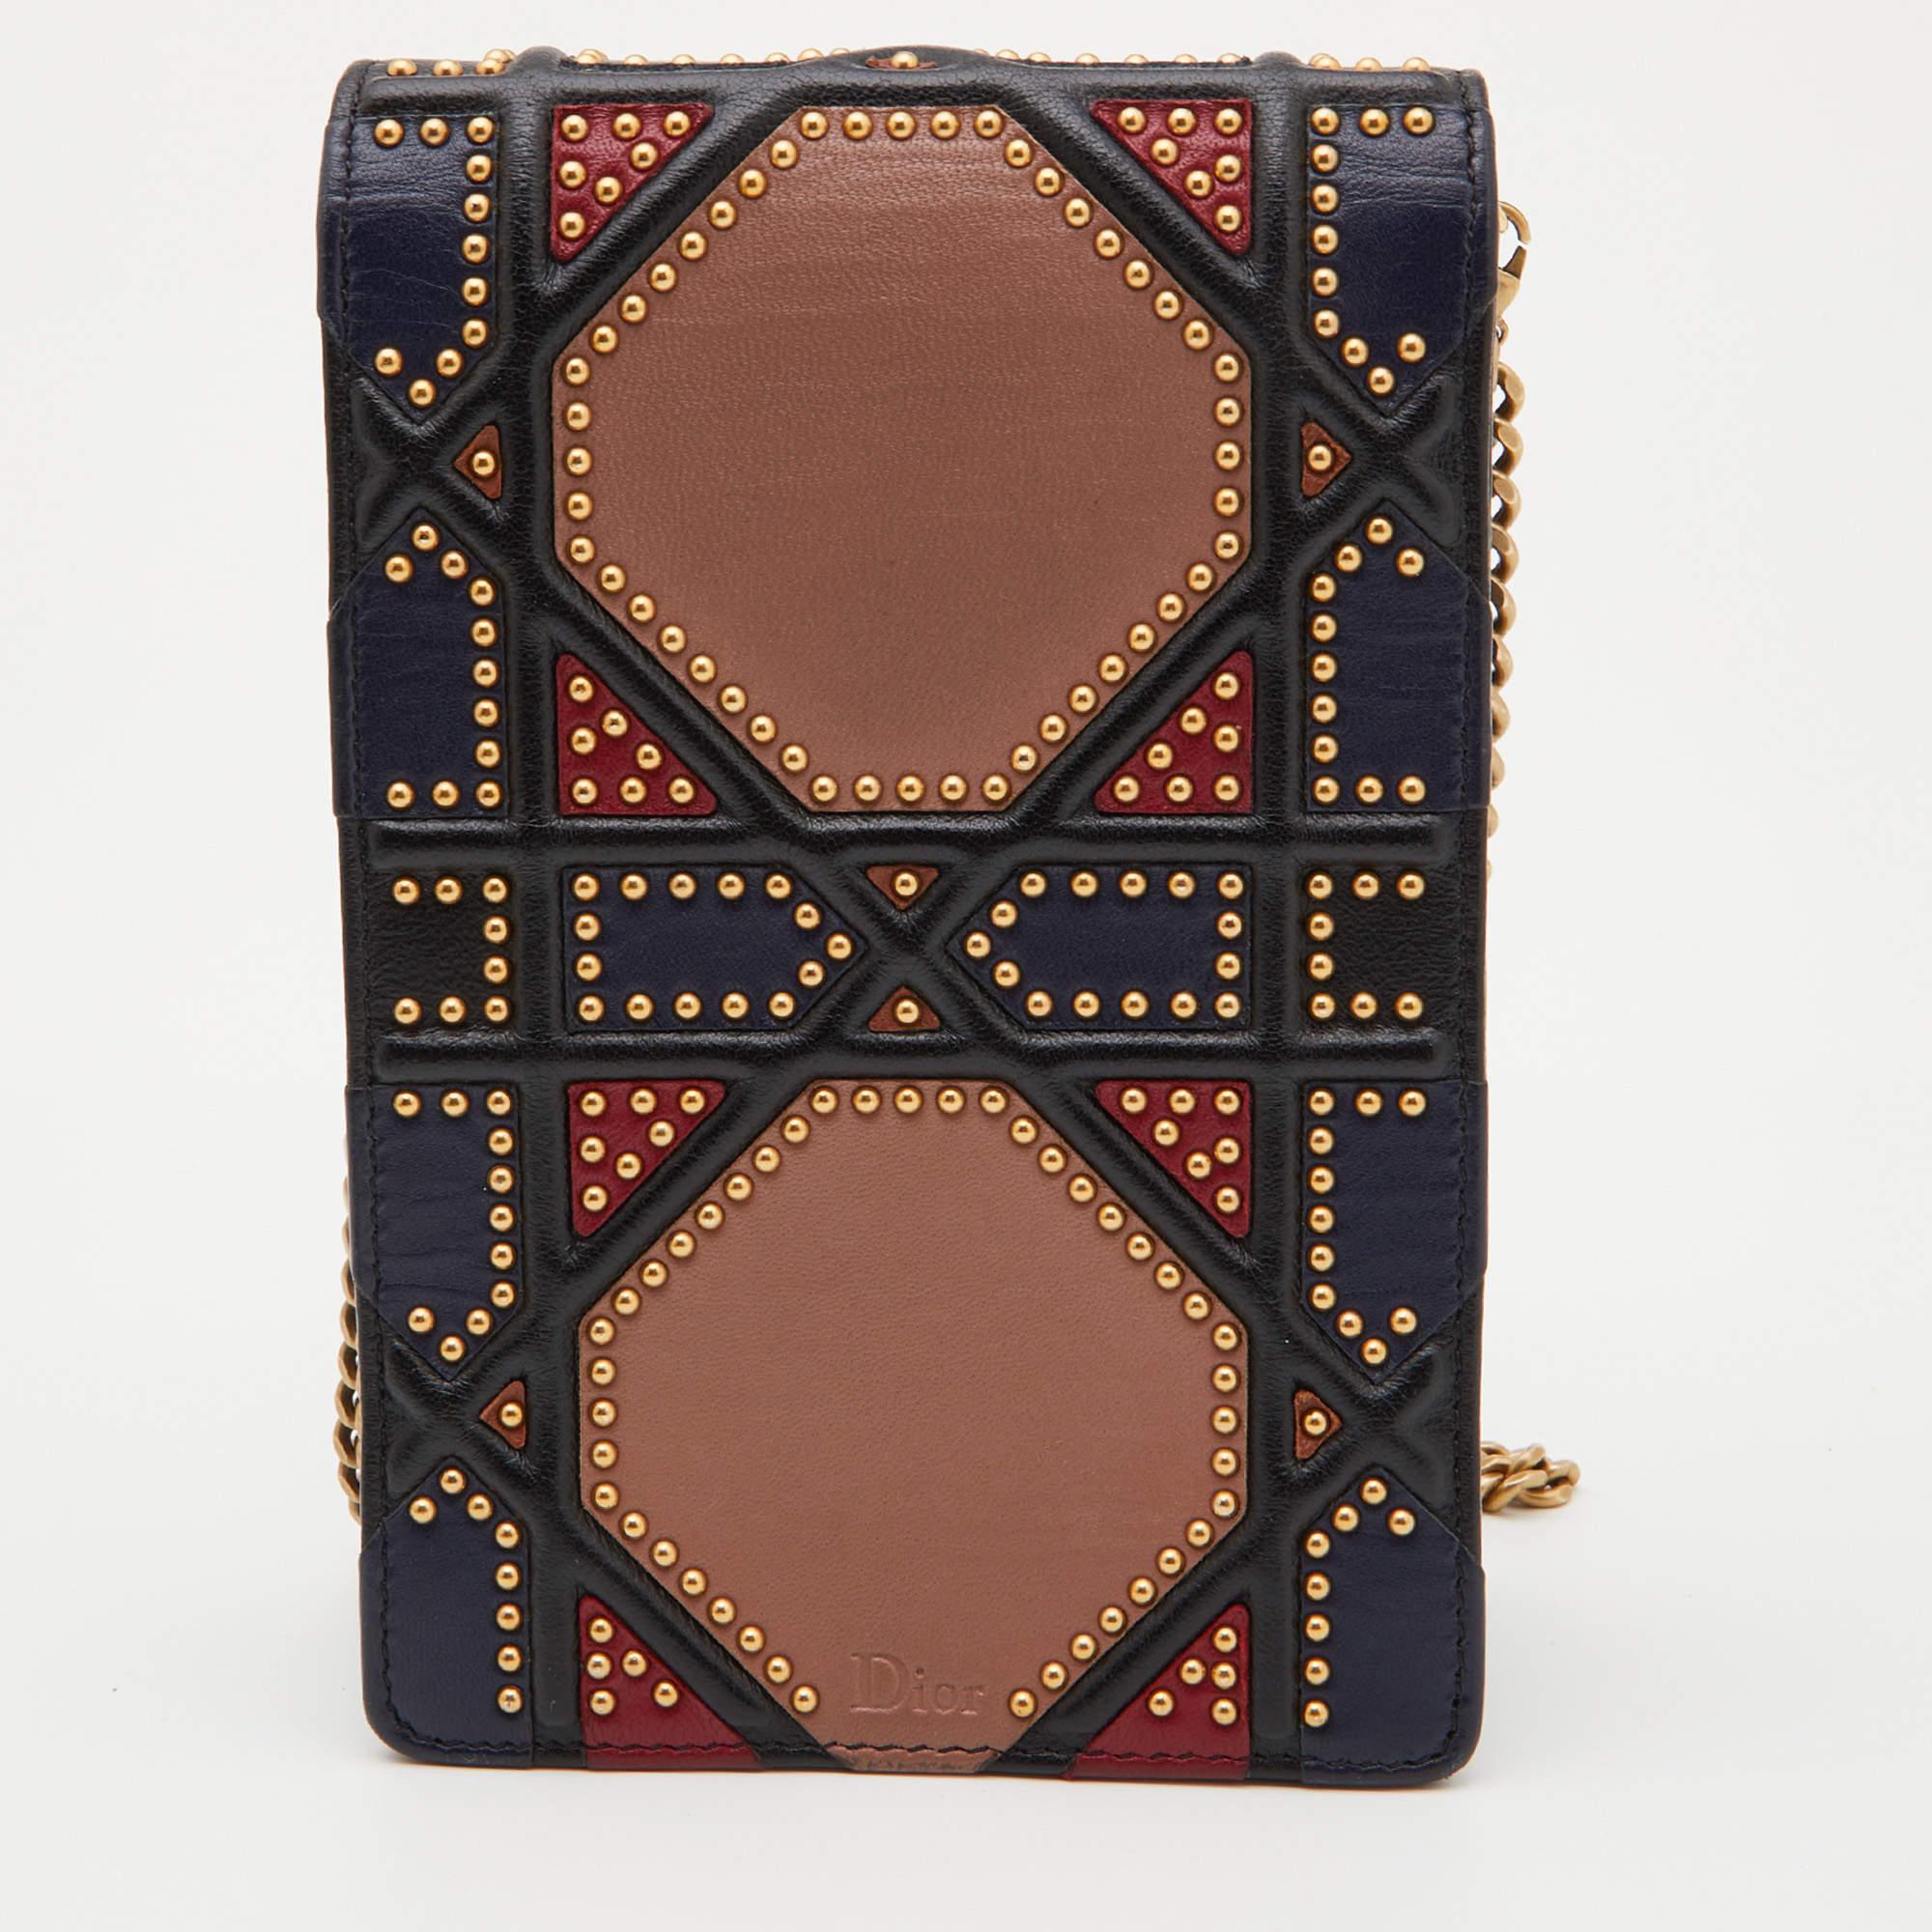 This Diorama clutch is adorable! It has been crafted from leather and detailed with studs in the brand's Cannage pattern. The signature crest sits on the flap securing two compartments while a shoulder chain is provided for you to carry